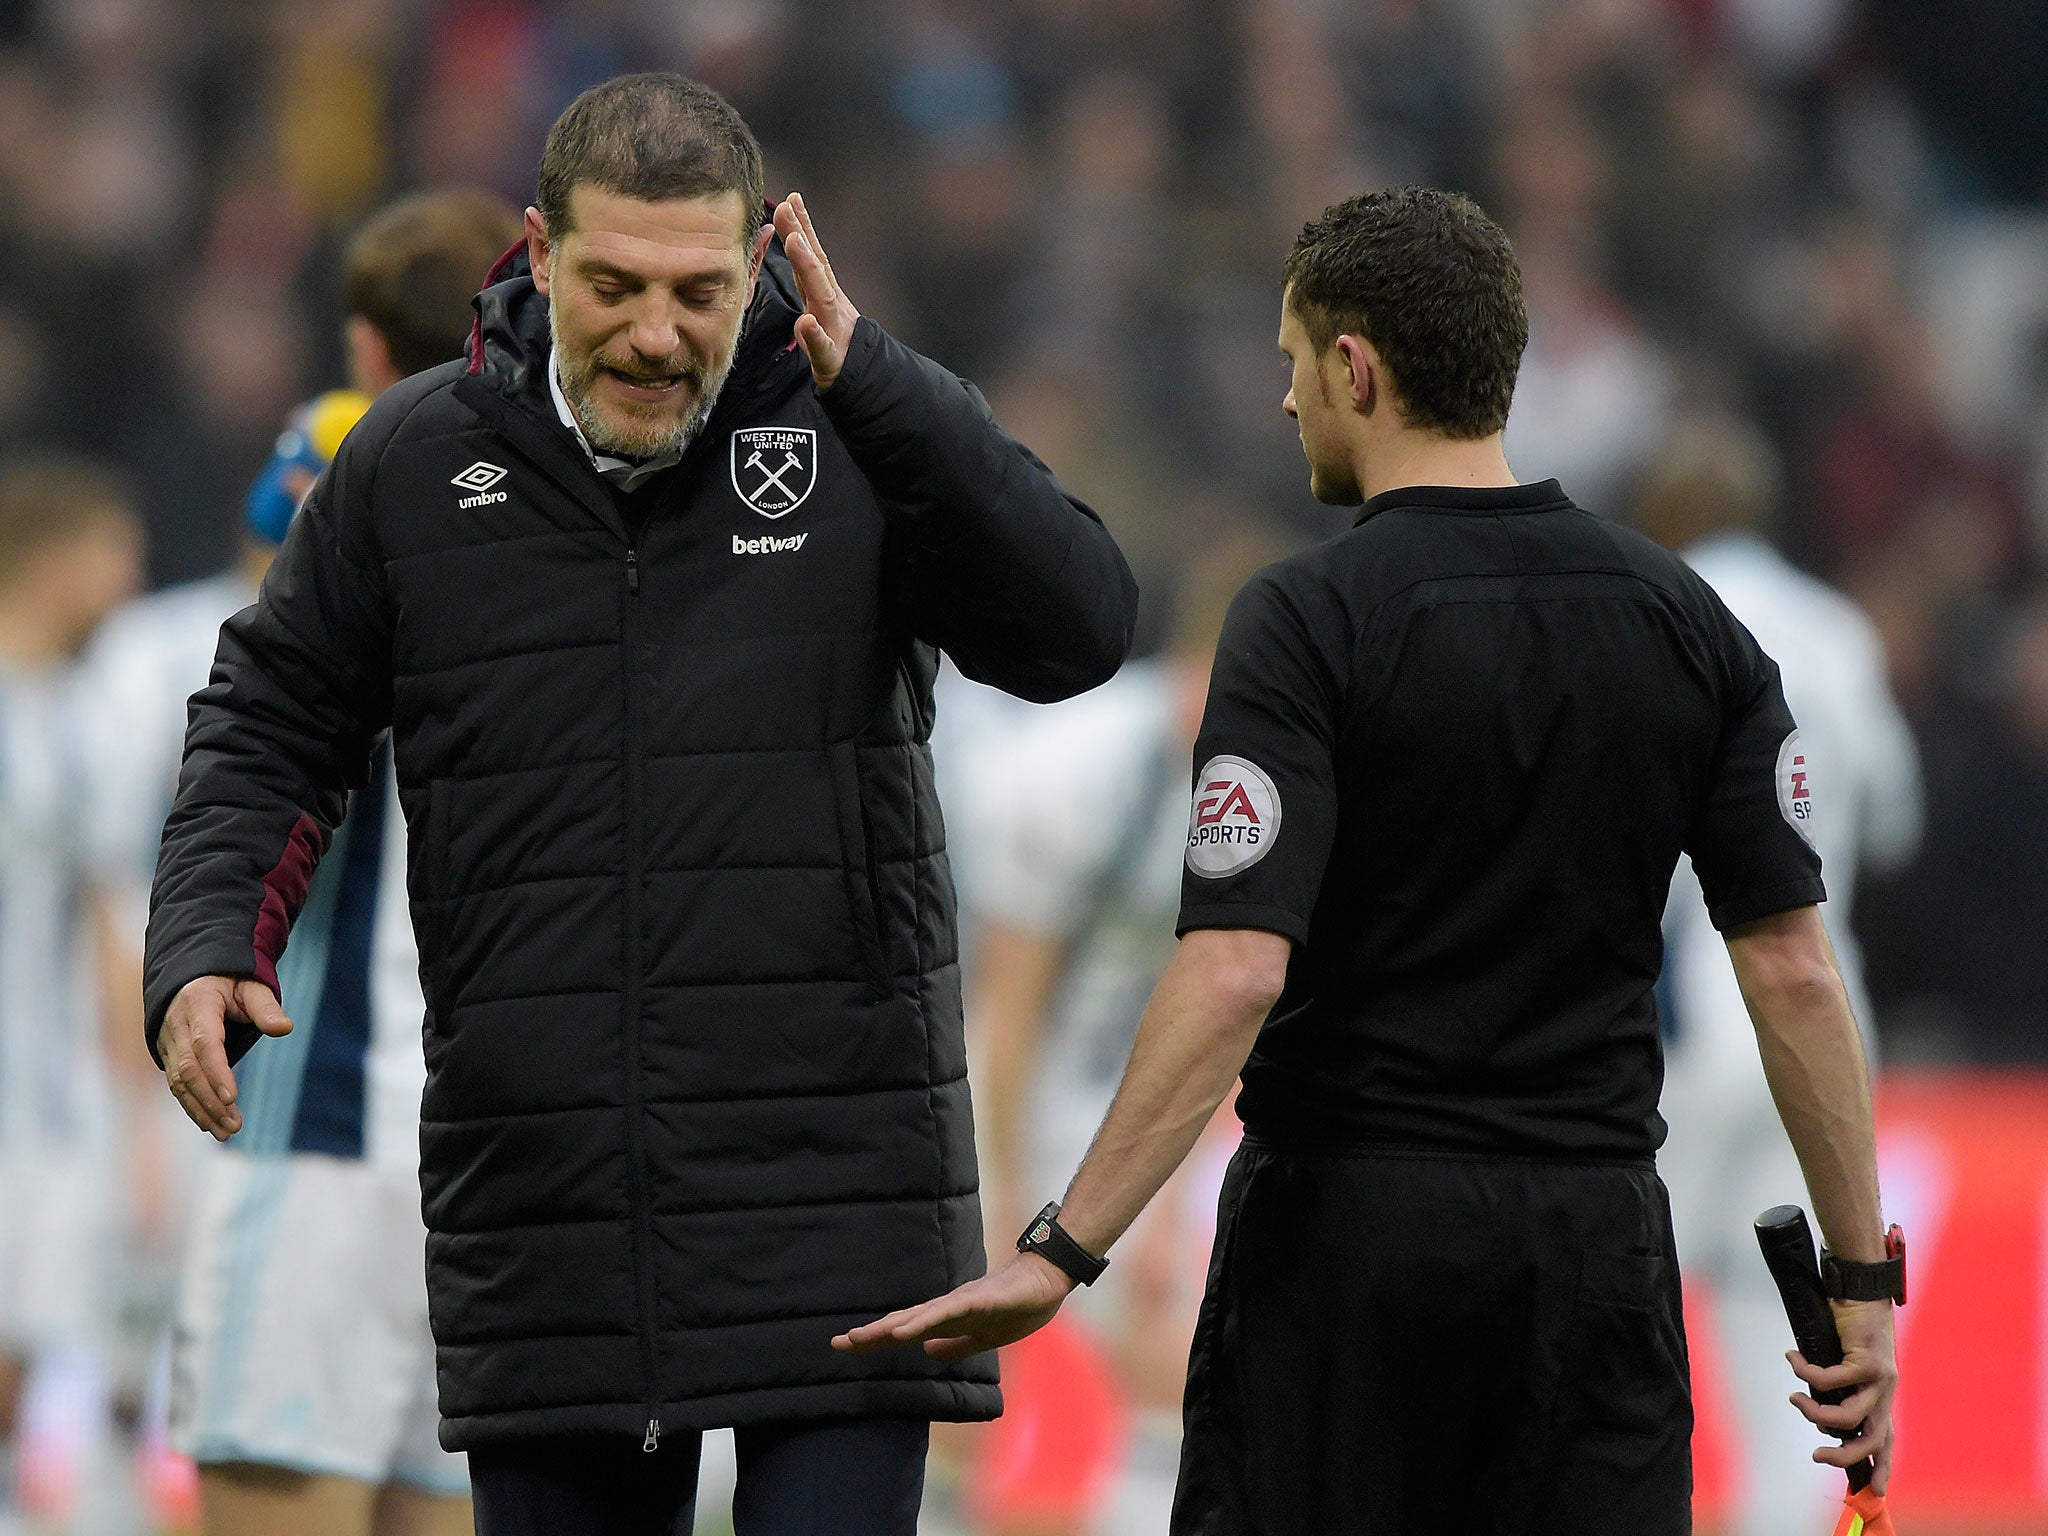 Bilic has avoided a touchline ban though